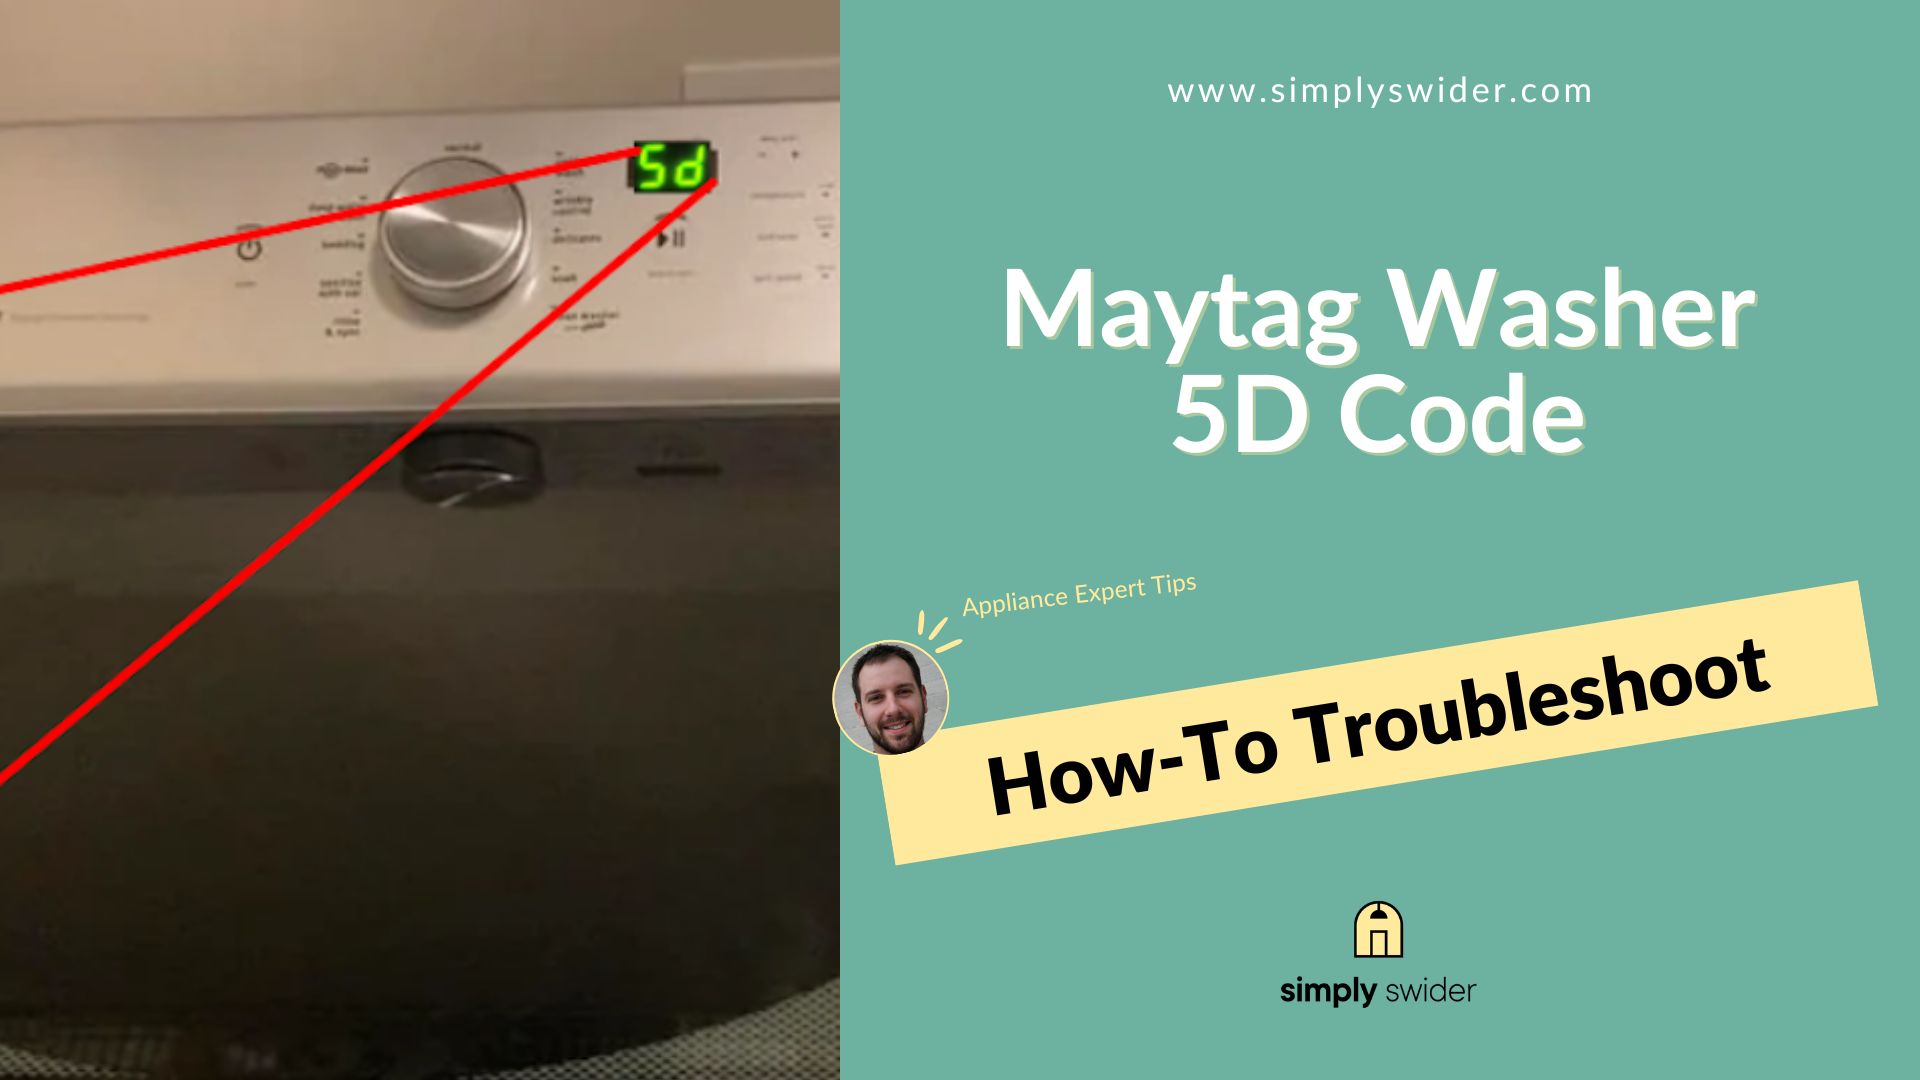 Maytag Washer 5D Code